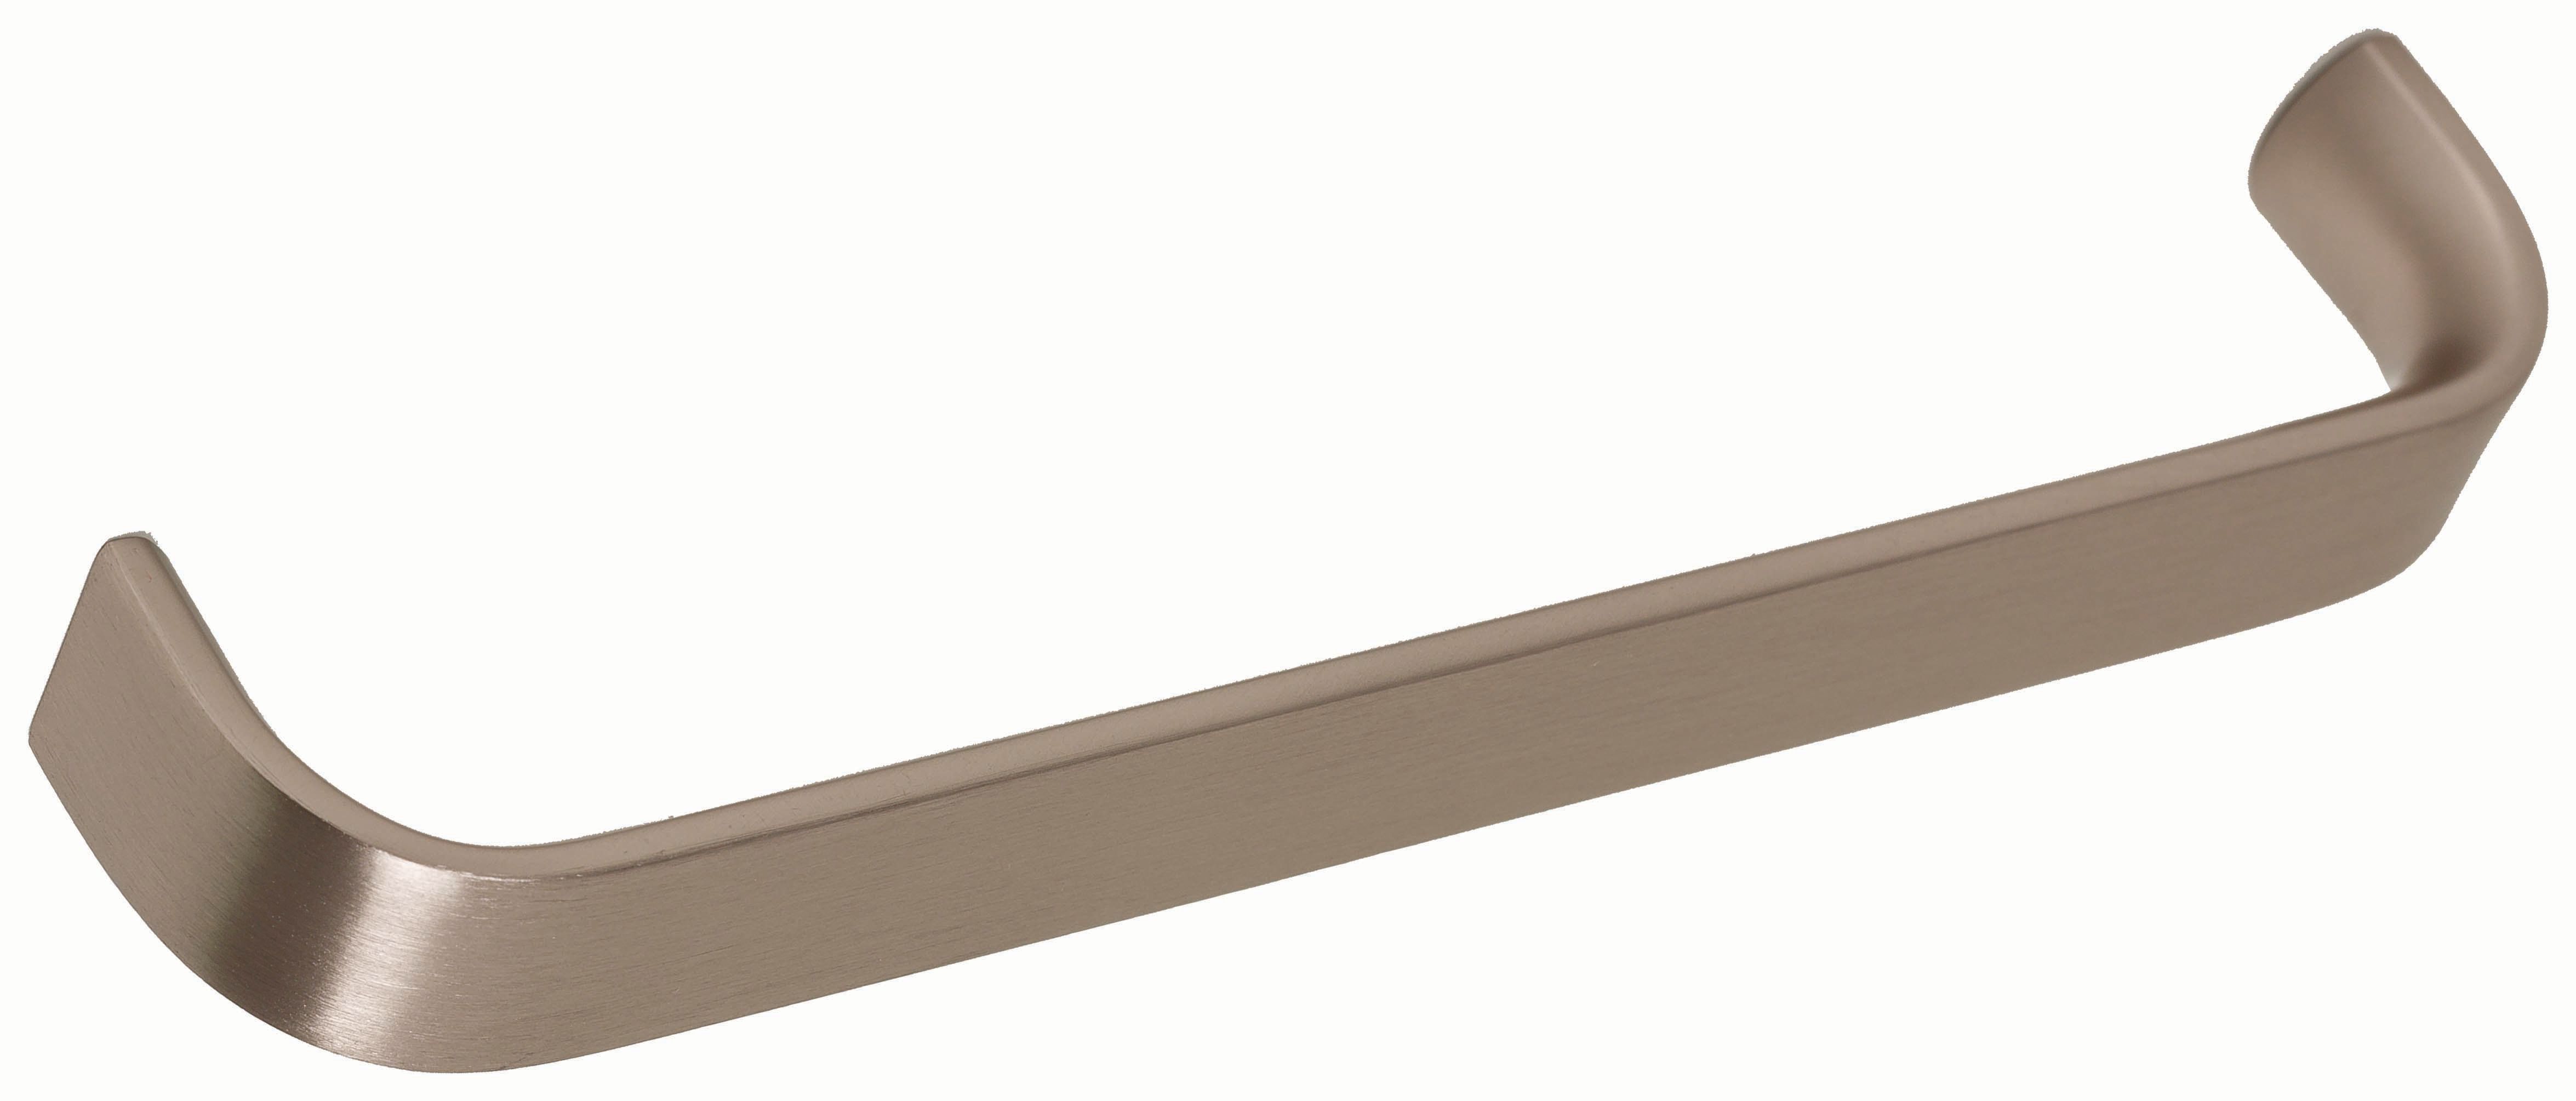 Image of Wickes Benington Bar Handle - Stainless Steel Effect 160mm